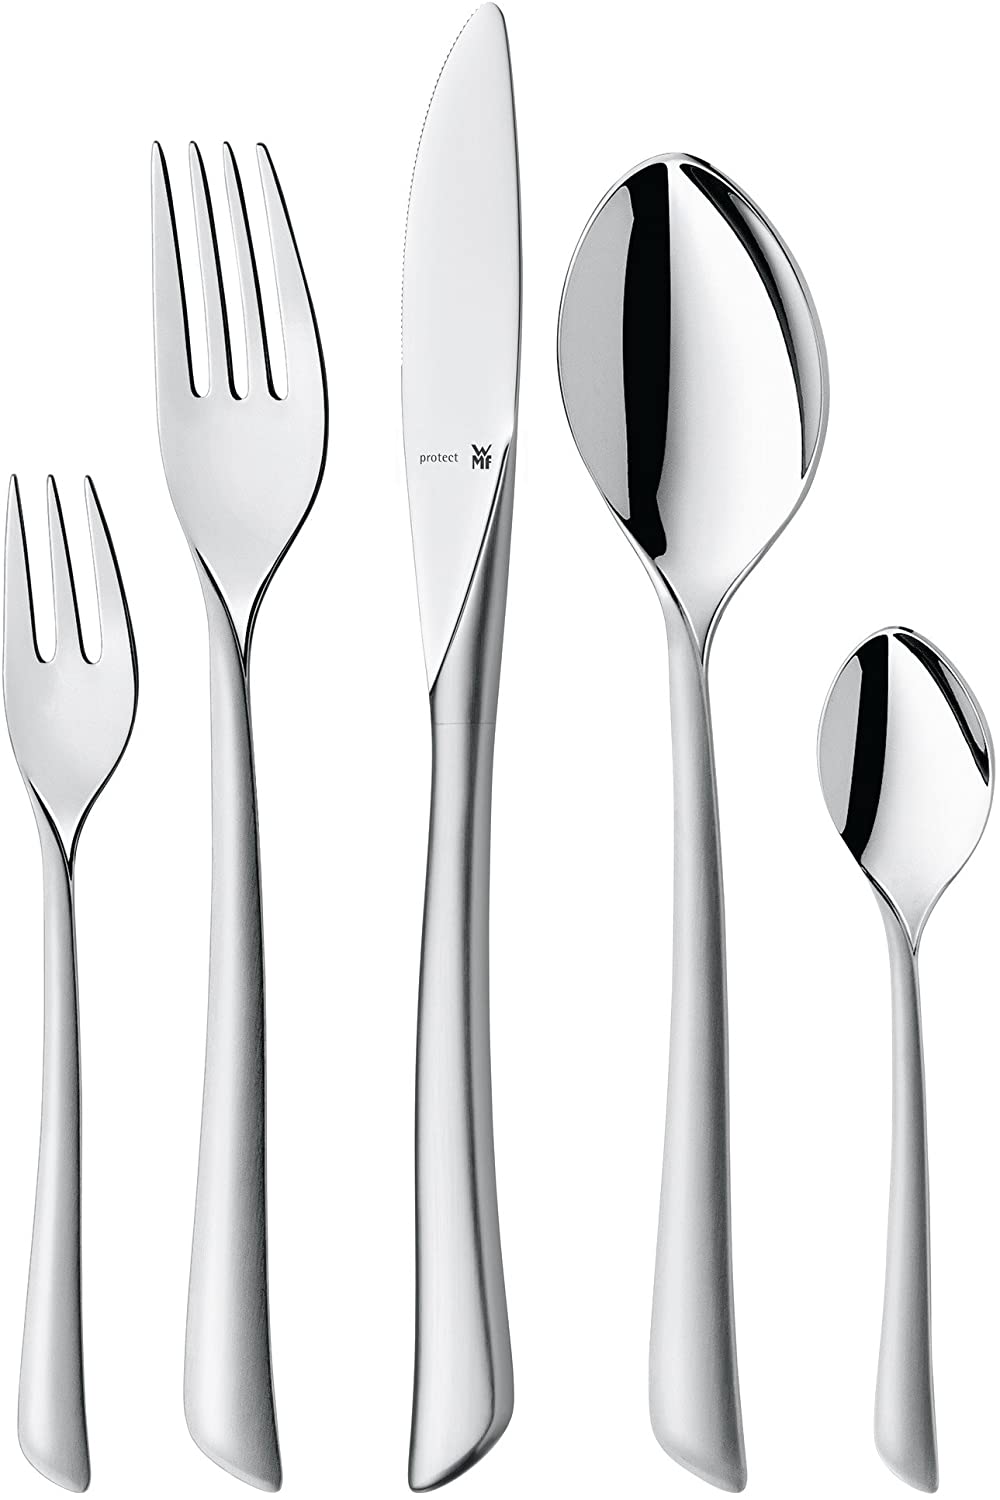 WMF Virginia 1142916390 Cutlery Set Cromargan Protect Stainless Steel 30 Pieces